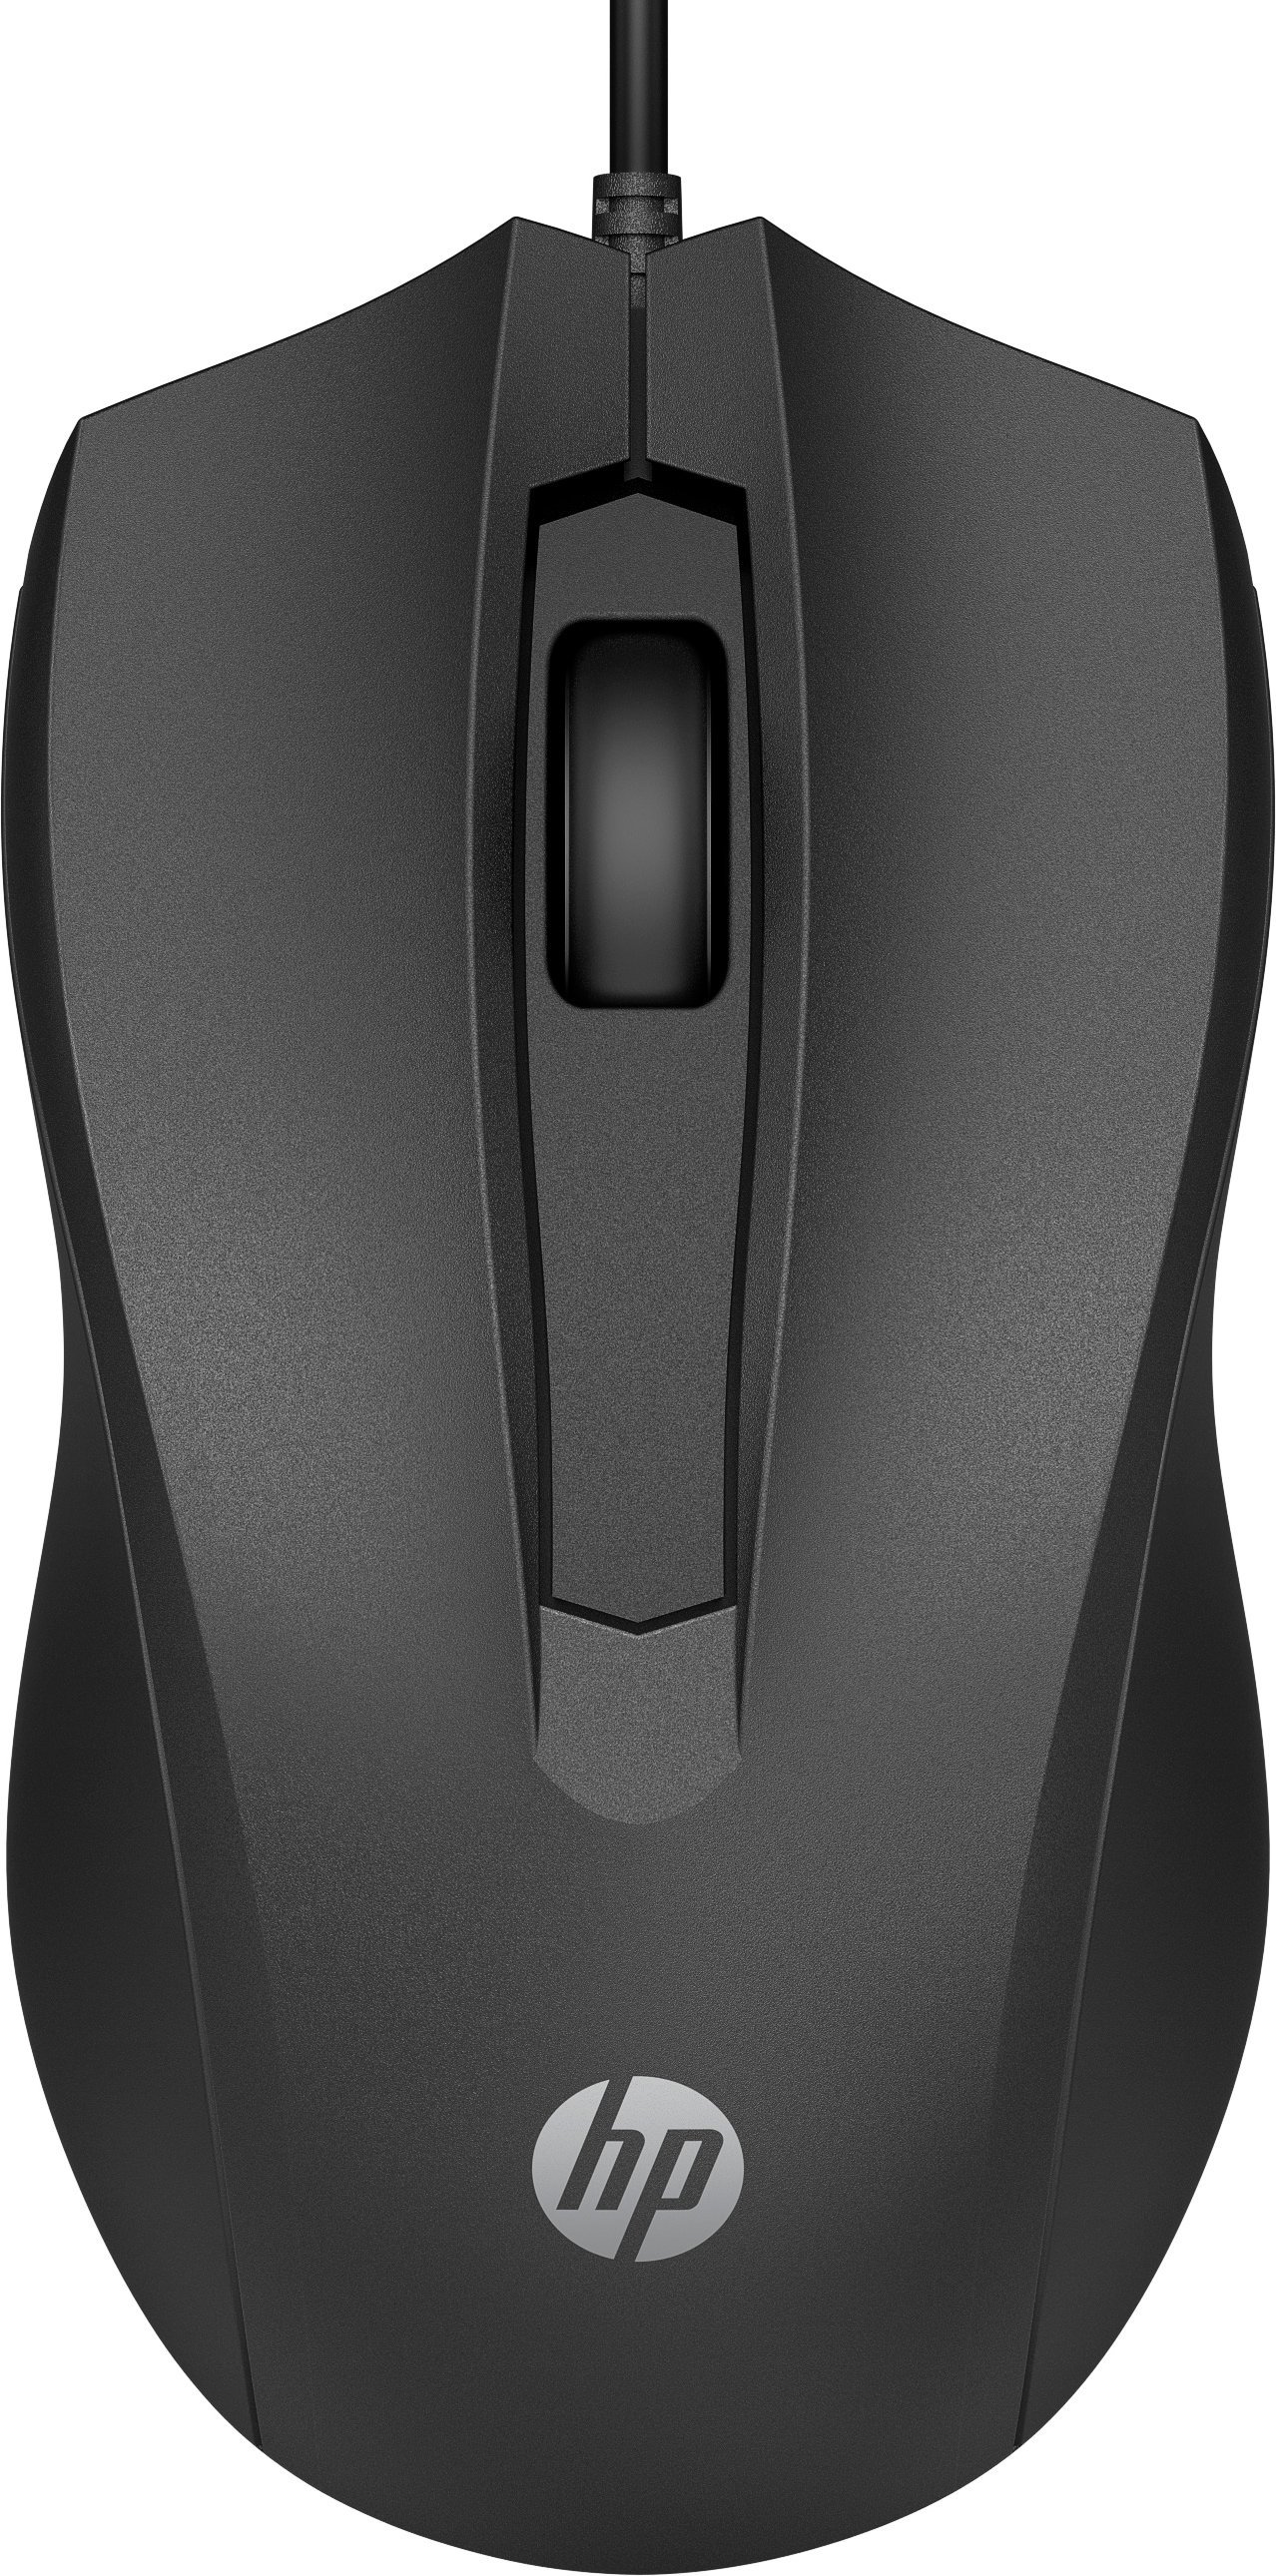 HP Mouse 6VY96AA / 6VY96AA#ABB Black